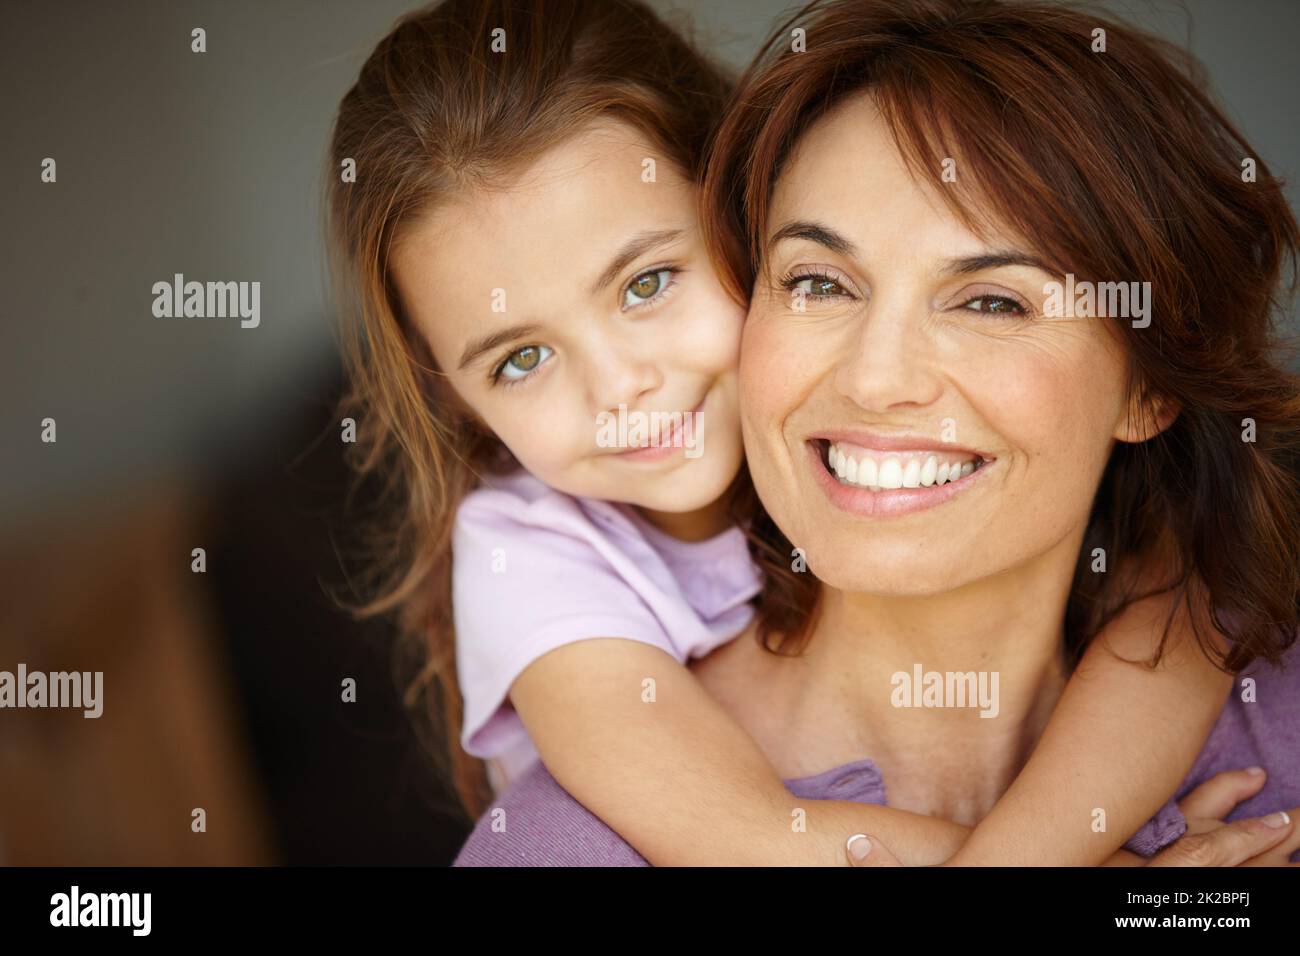 Home is where your mom is. Portrait of a mother spending time with her adorable little girl. Stock Photo